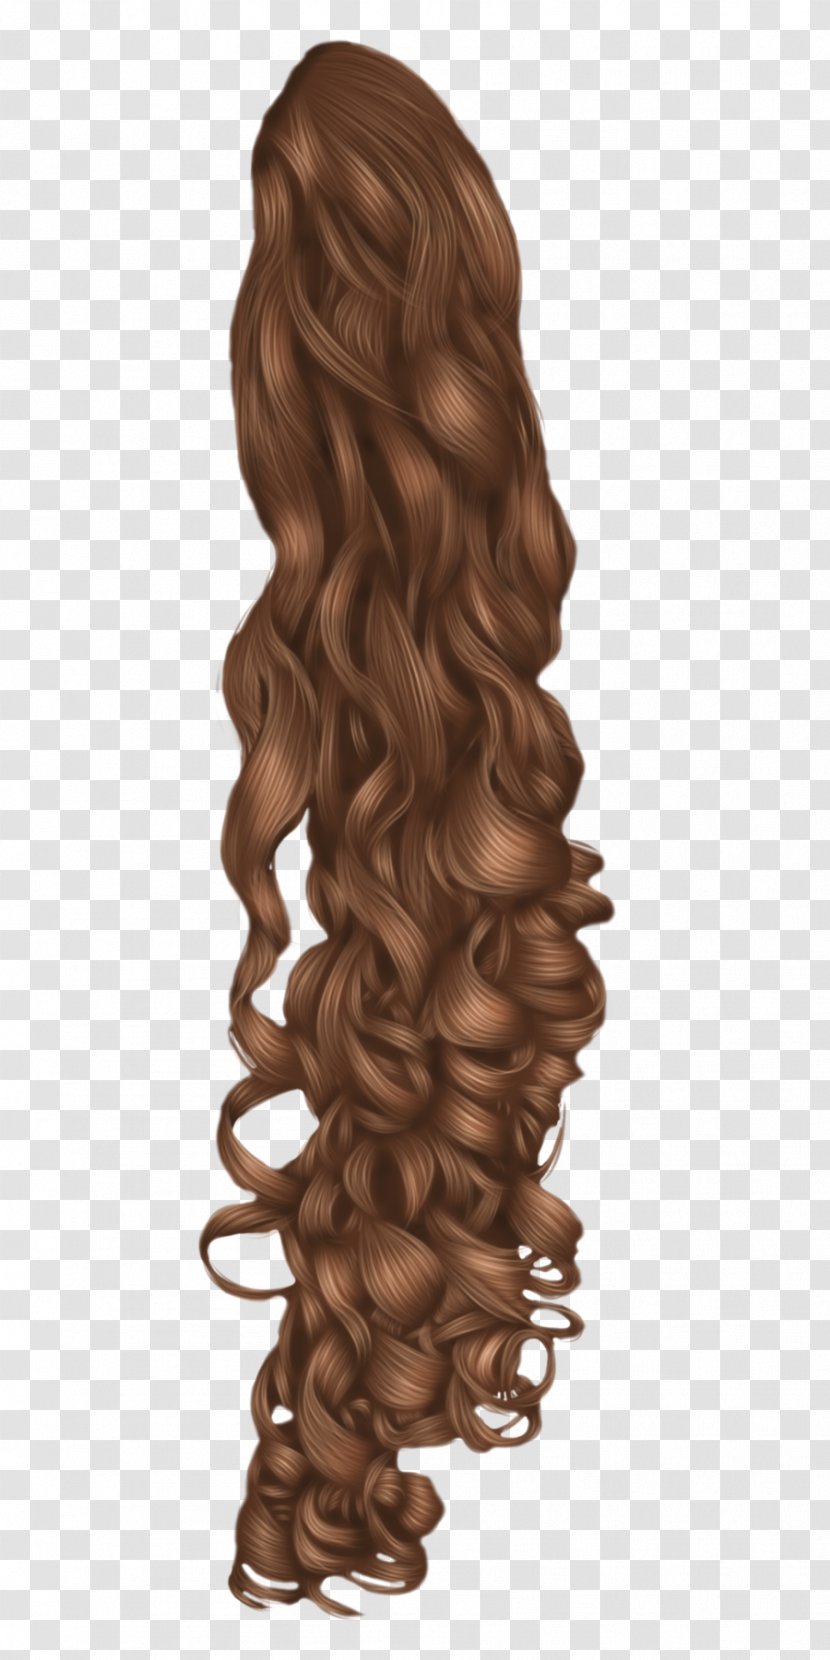 Black Hair Wig Hairstyle - Curly Transparent PNG